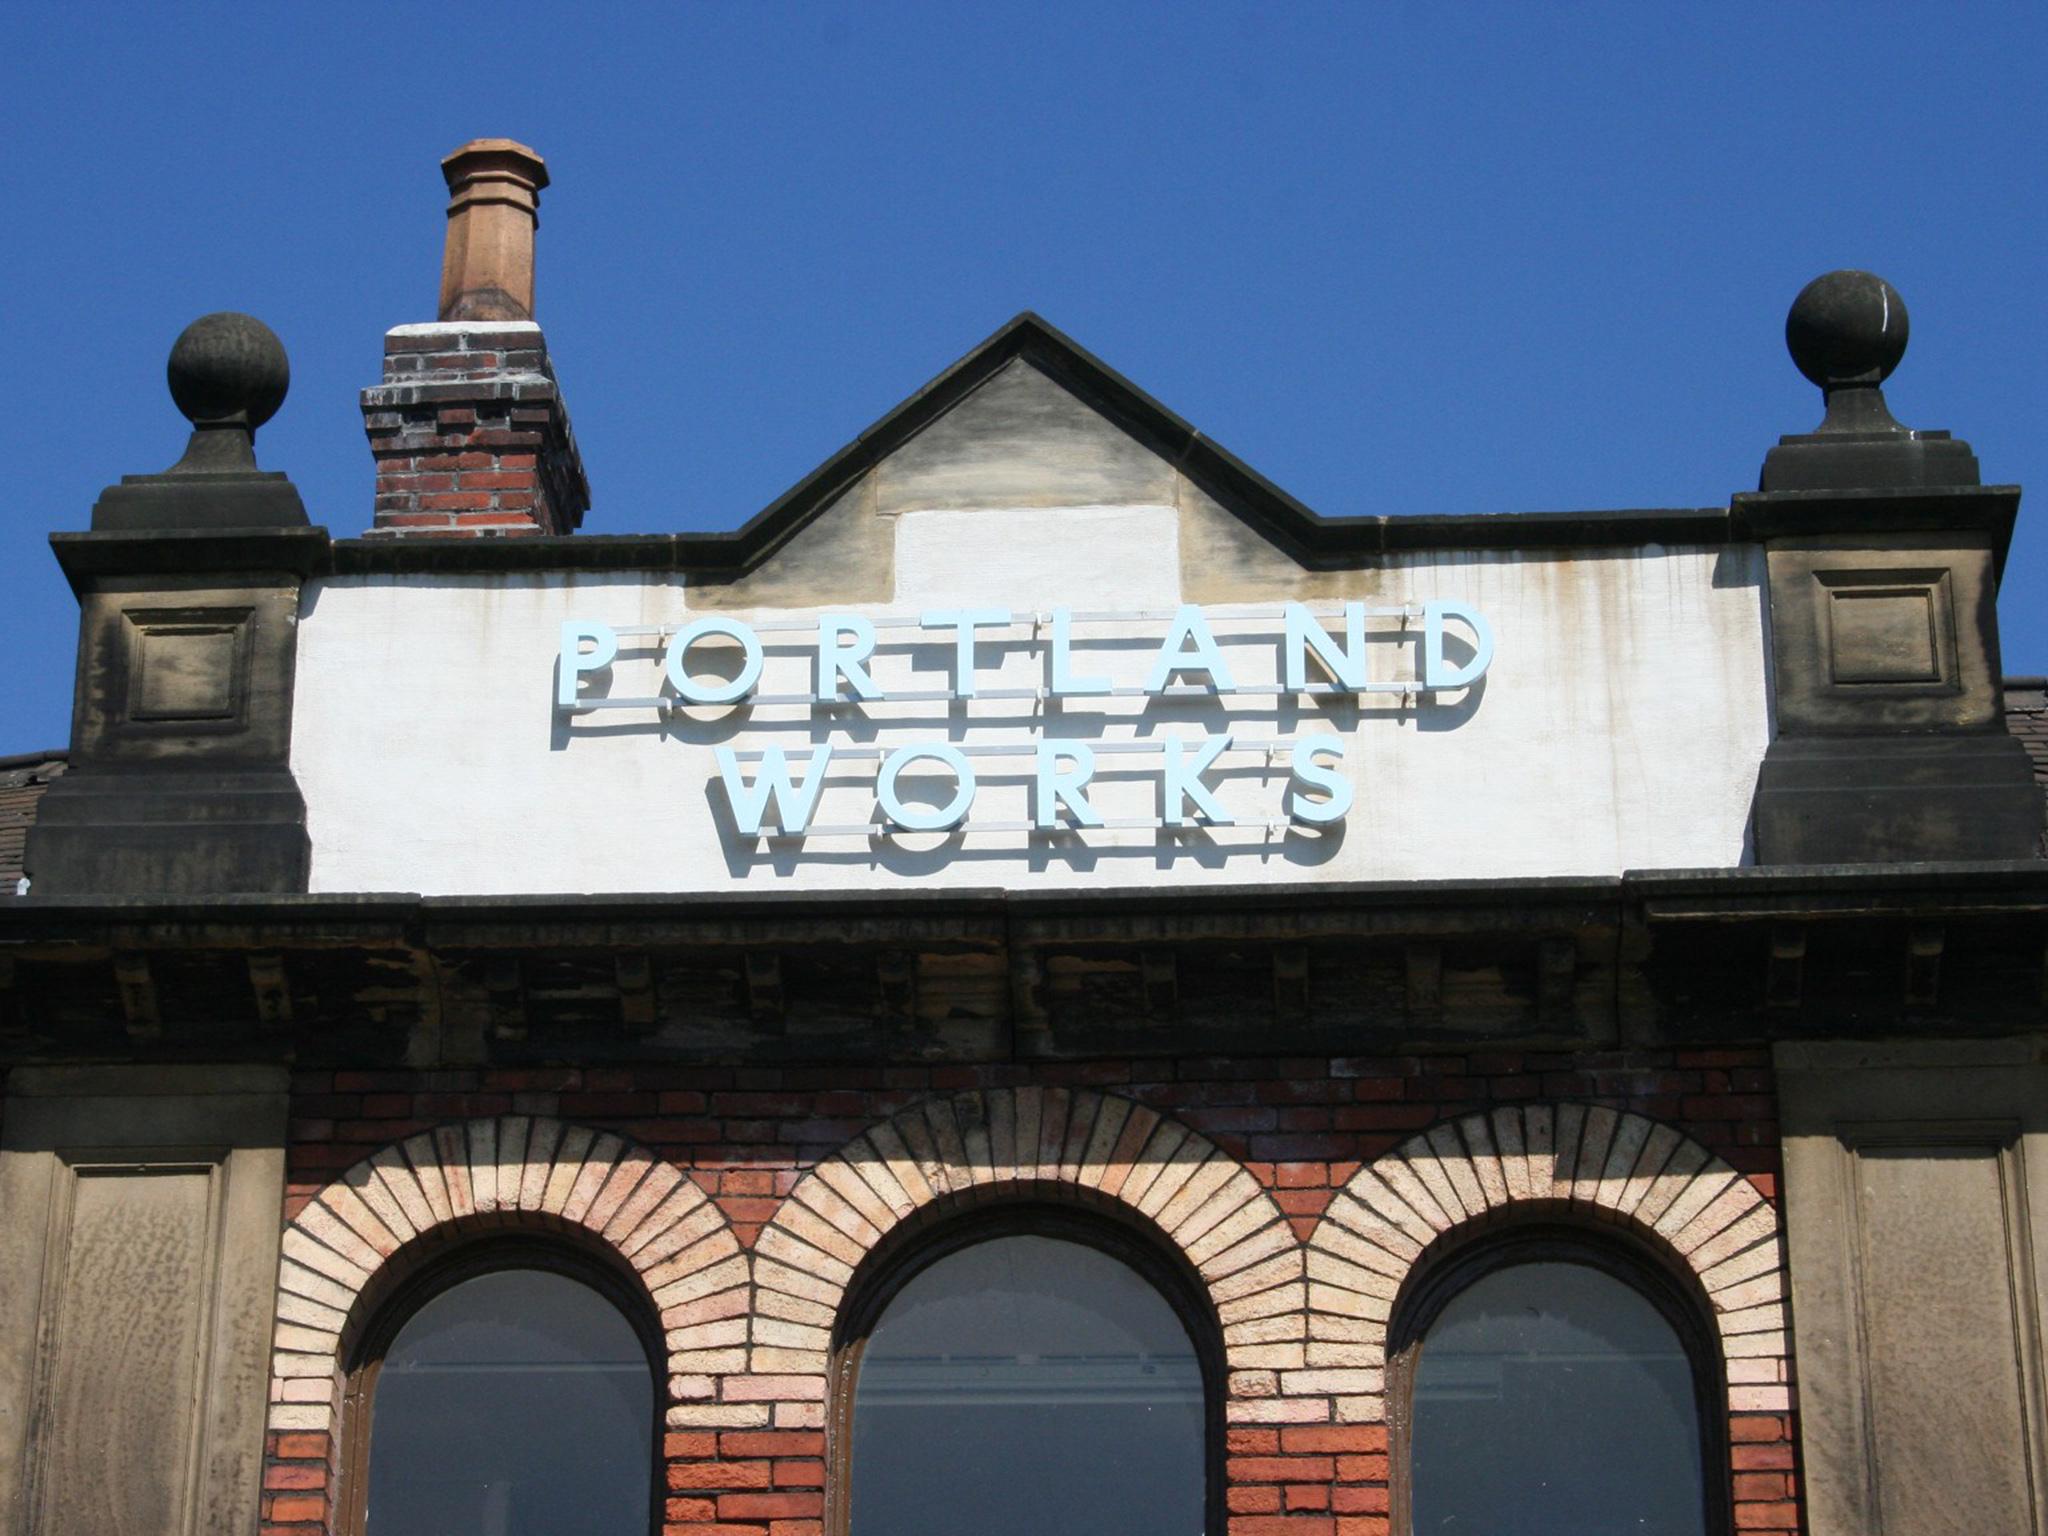 Portland Works in Sheffield is home to a number of small workshops and was successfully saved from redevelopment